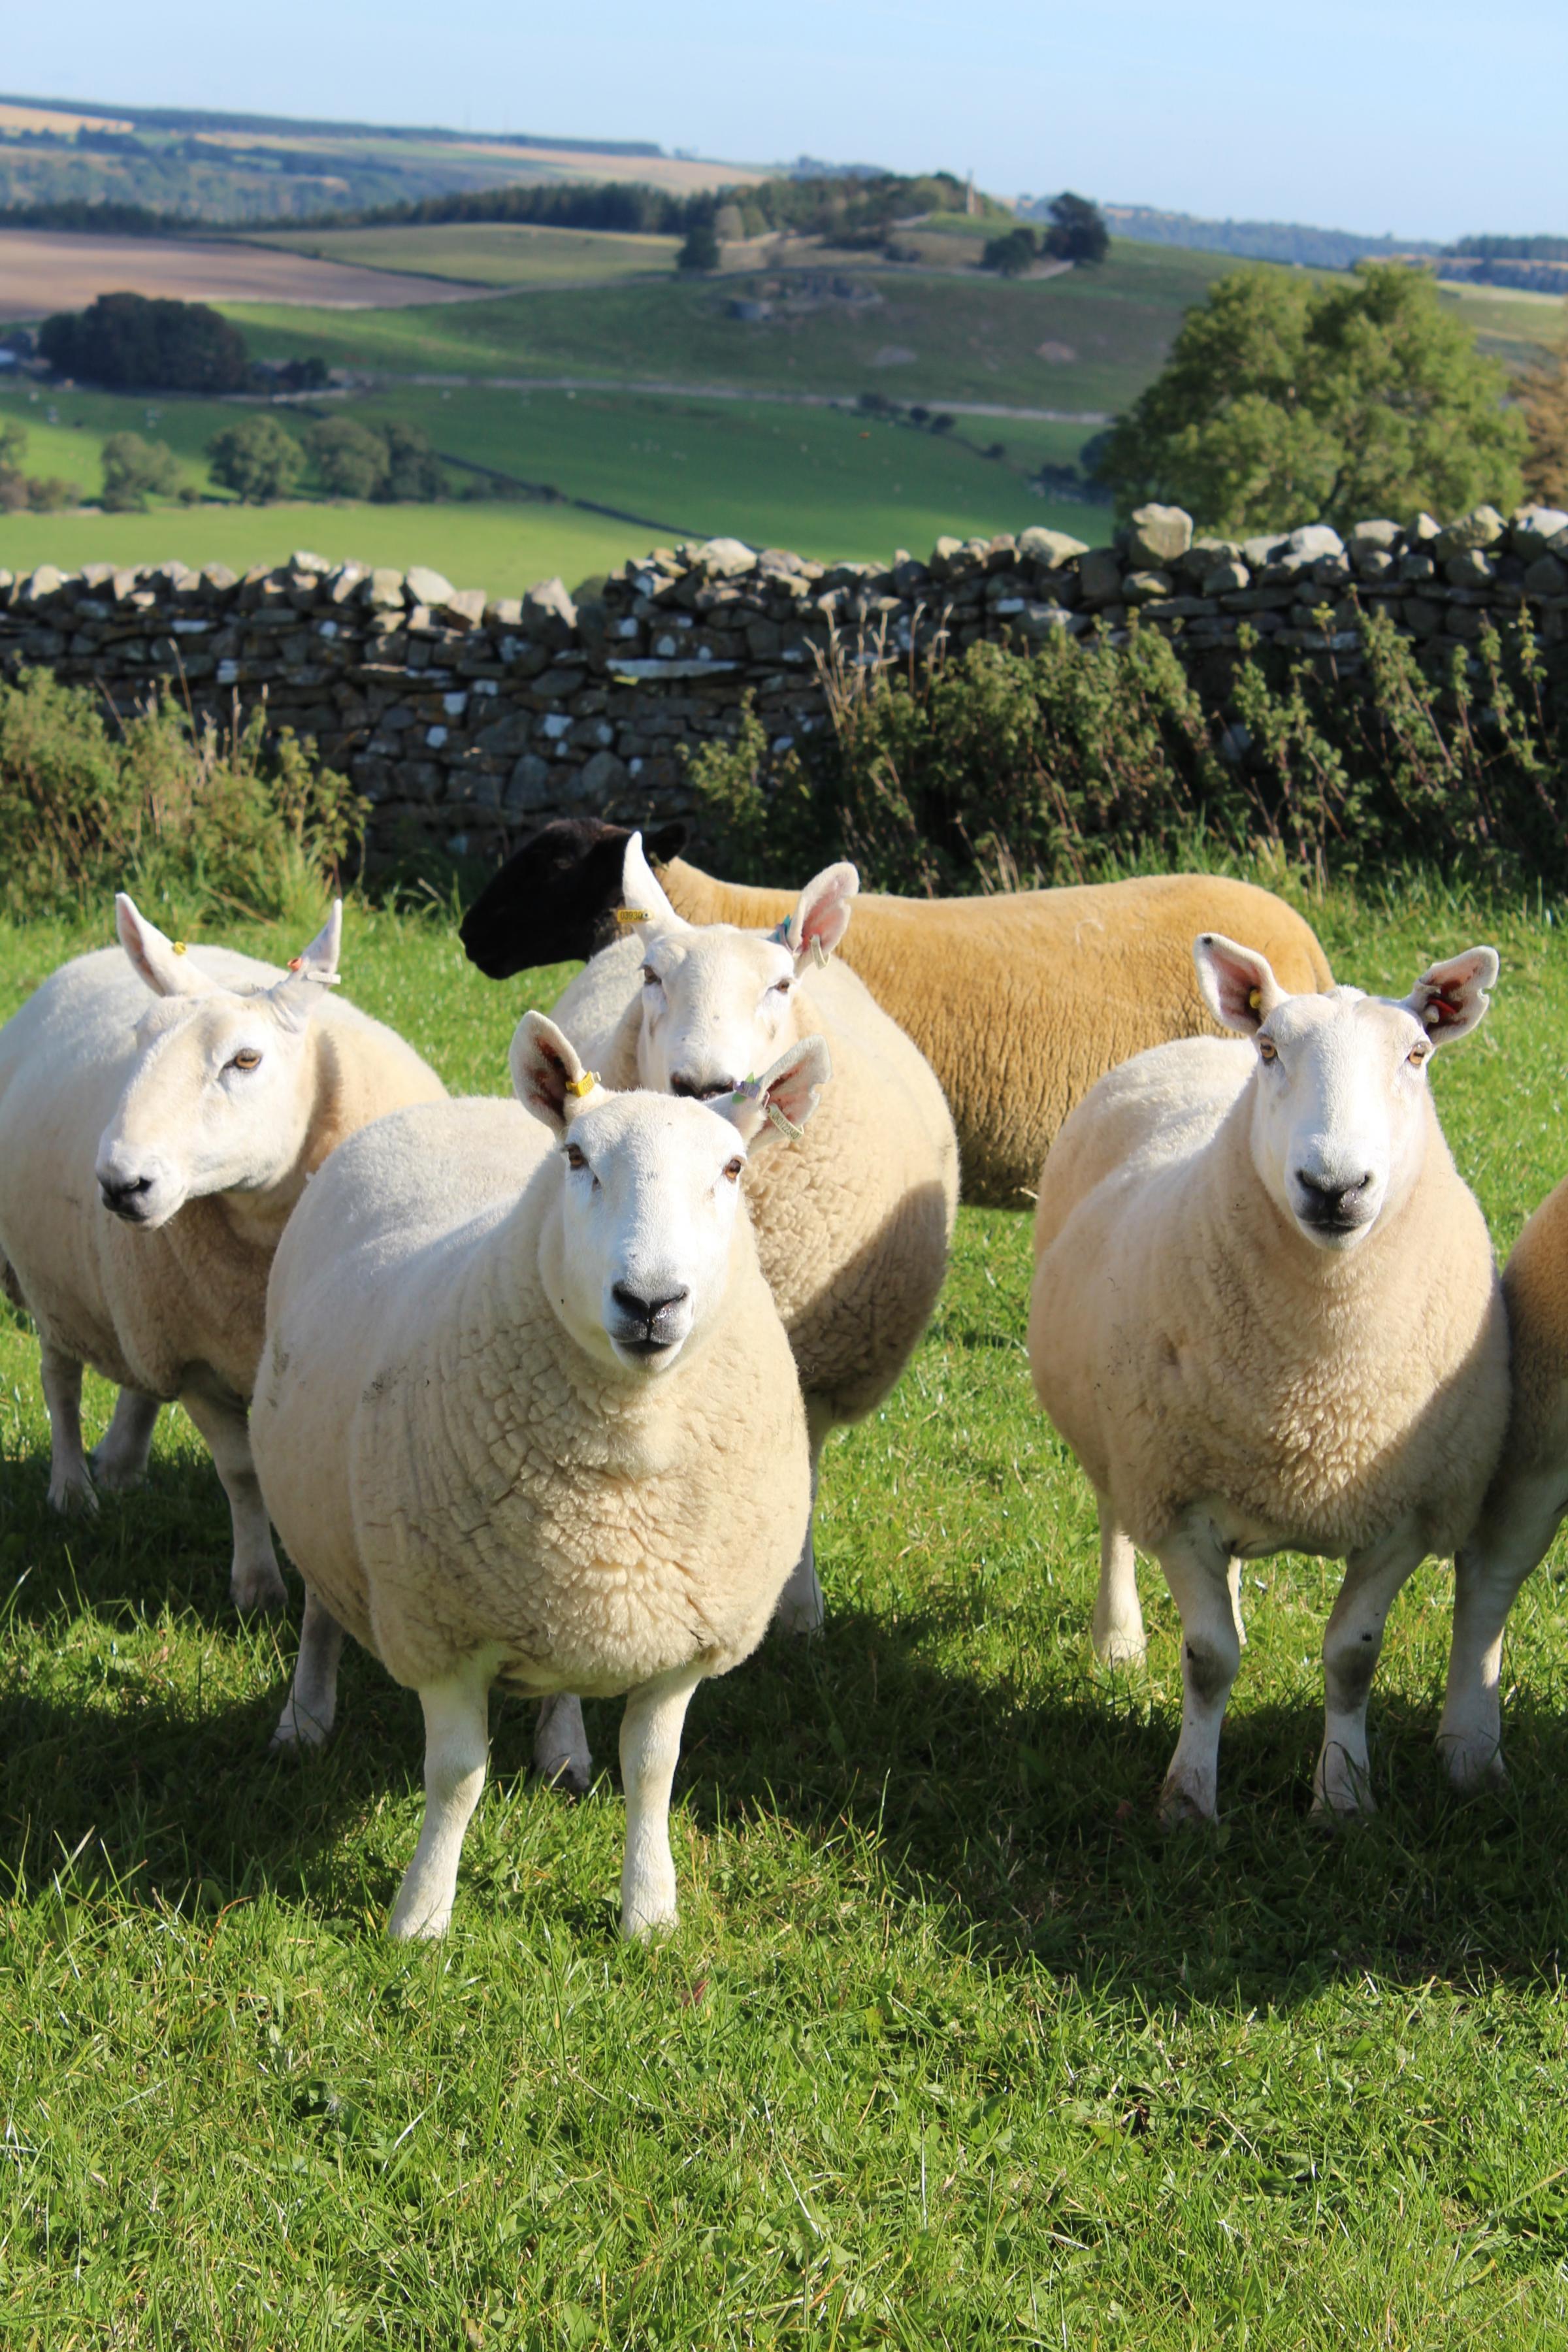 The overall aim should be to keep ewes in reasonable condition throughout the year